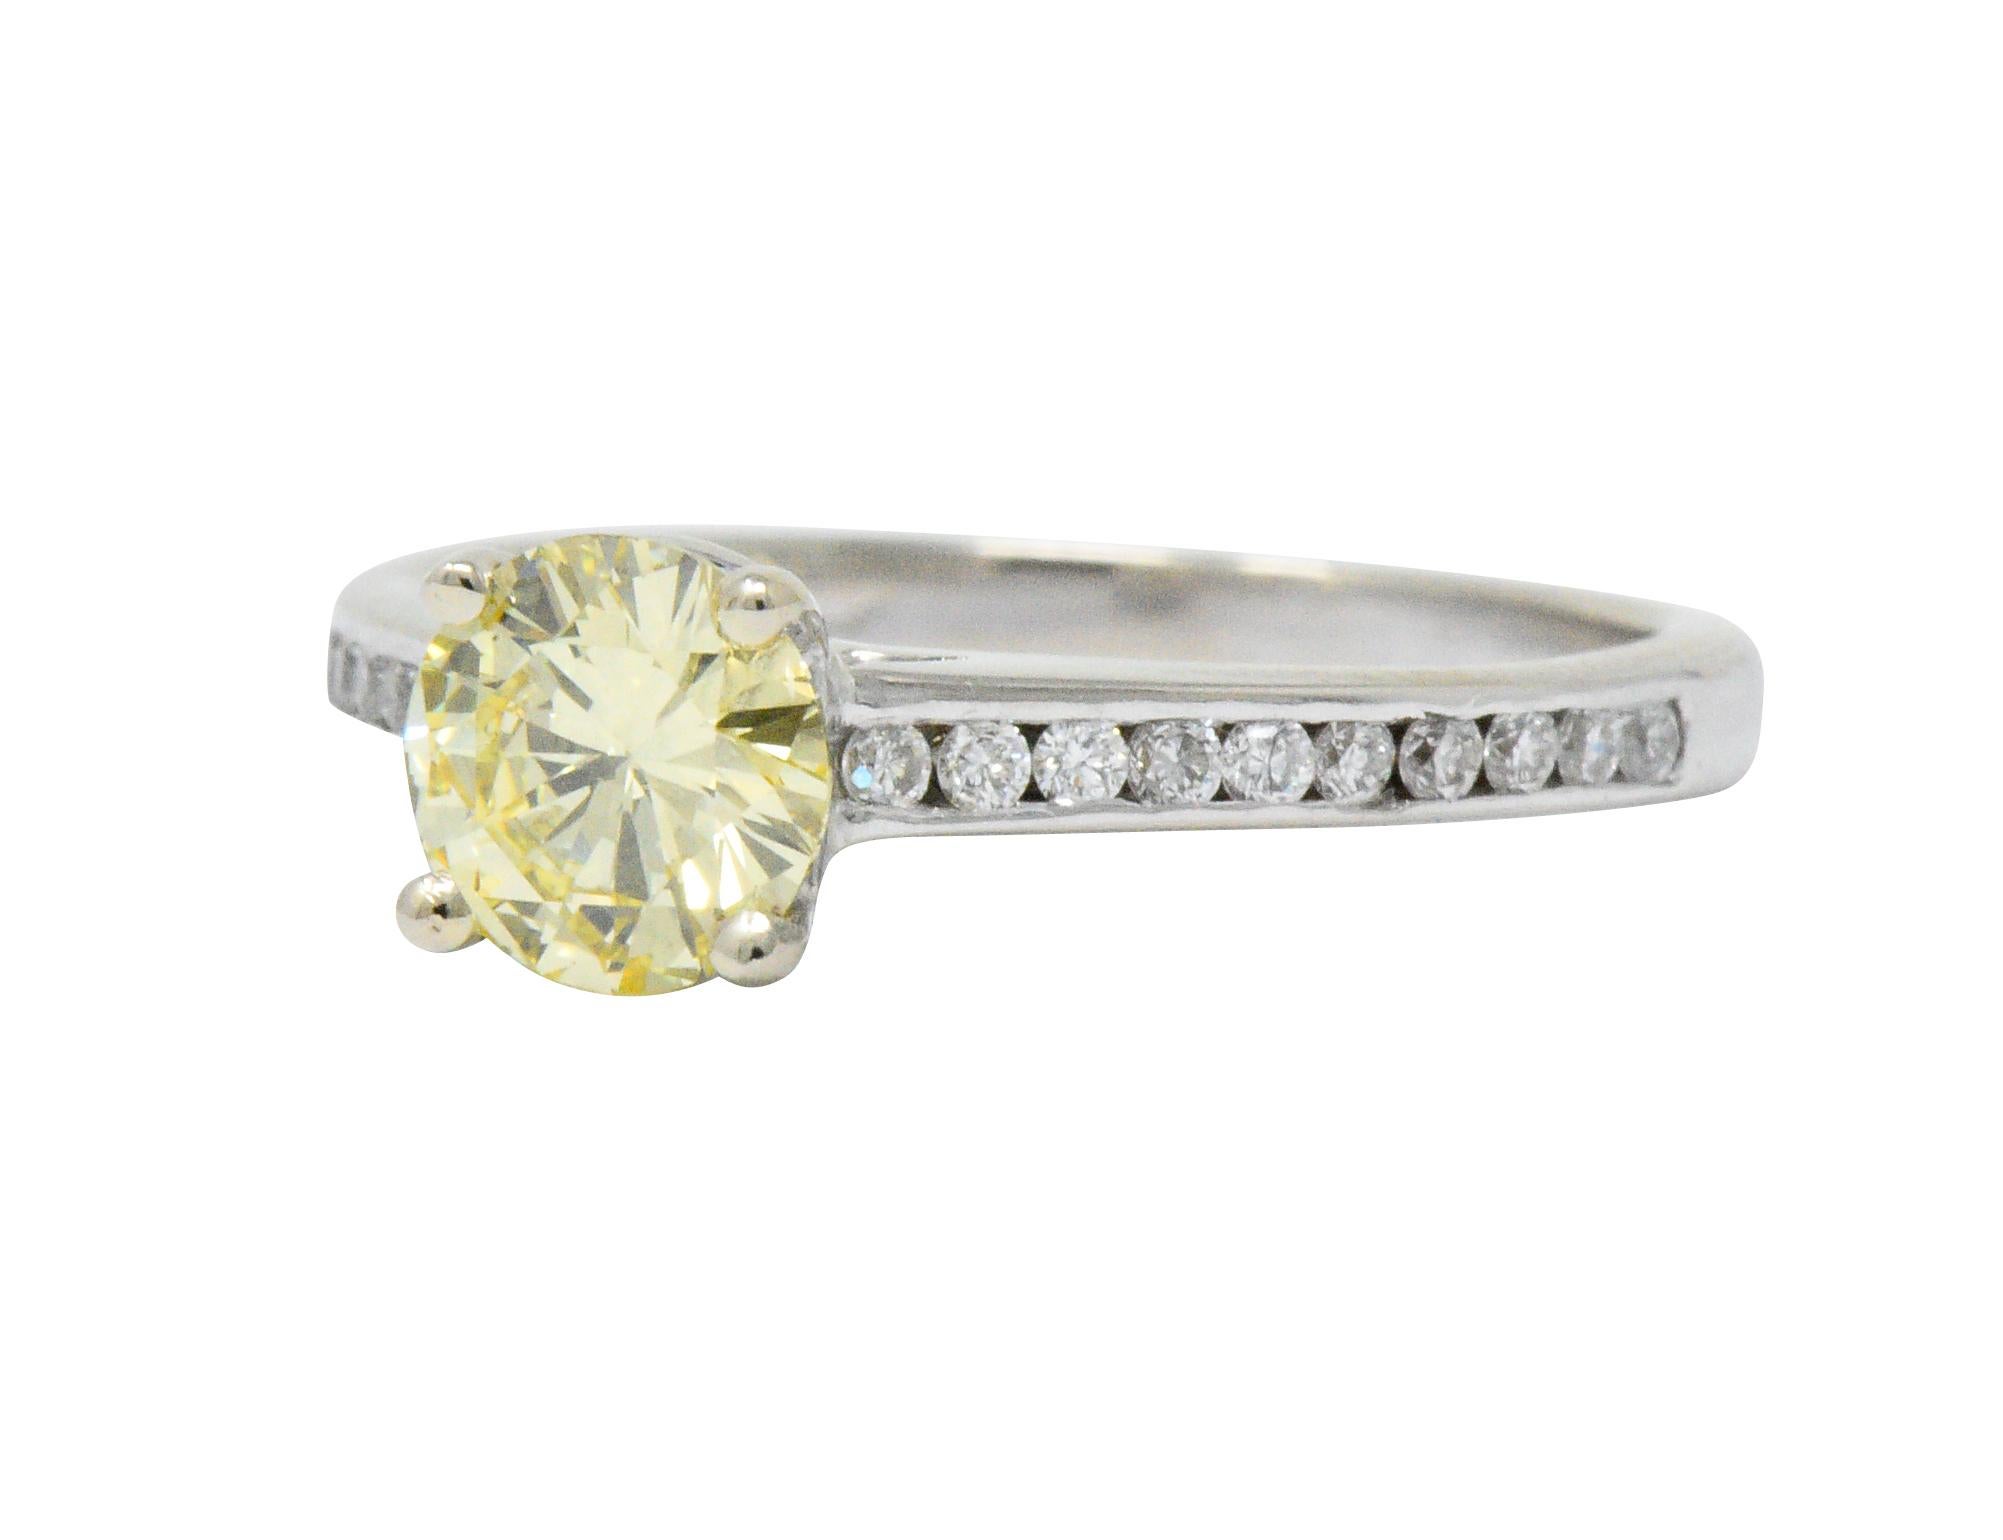 Centering a round brilliant cut diamond weighing 0.64 carat, natural fancy yellow in color with SI1 clarity

Flanked by channel set round brilliant cut diamonds weighing approximately 0.15 carat total, G/H color with SI clarity

Tested as 14 karat